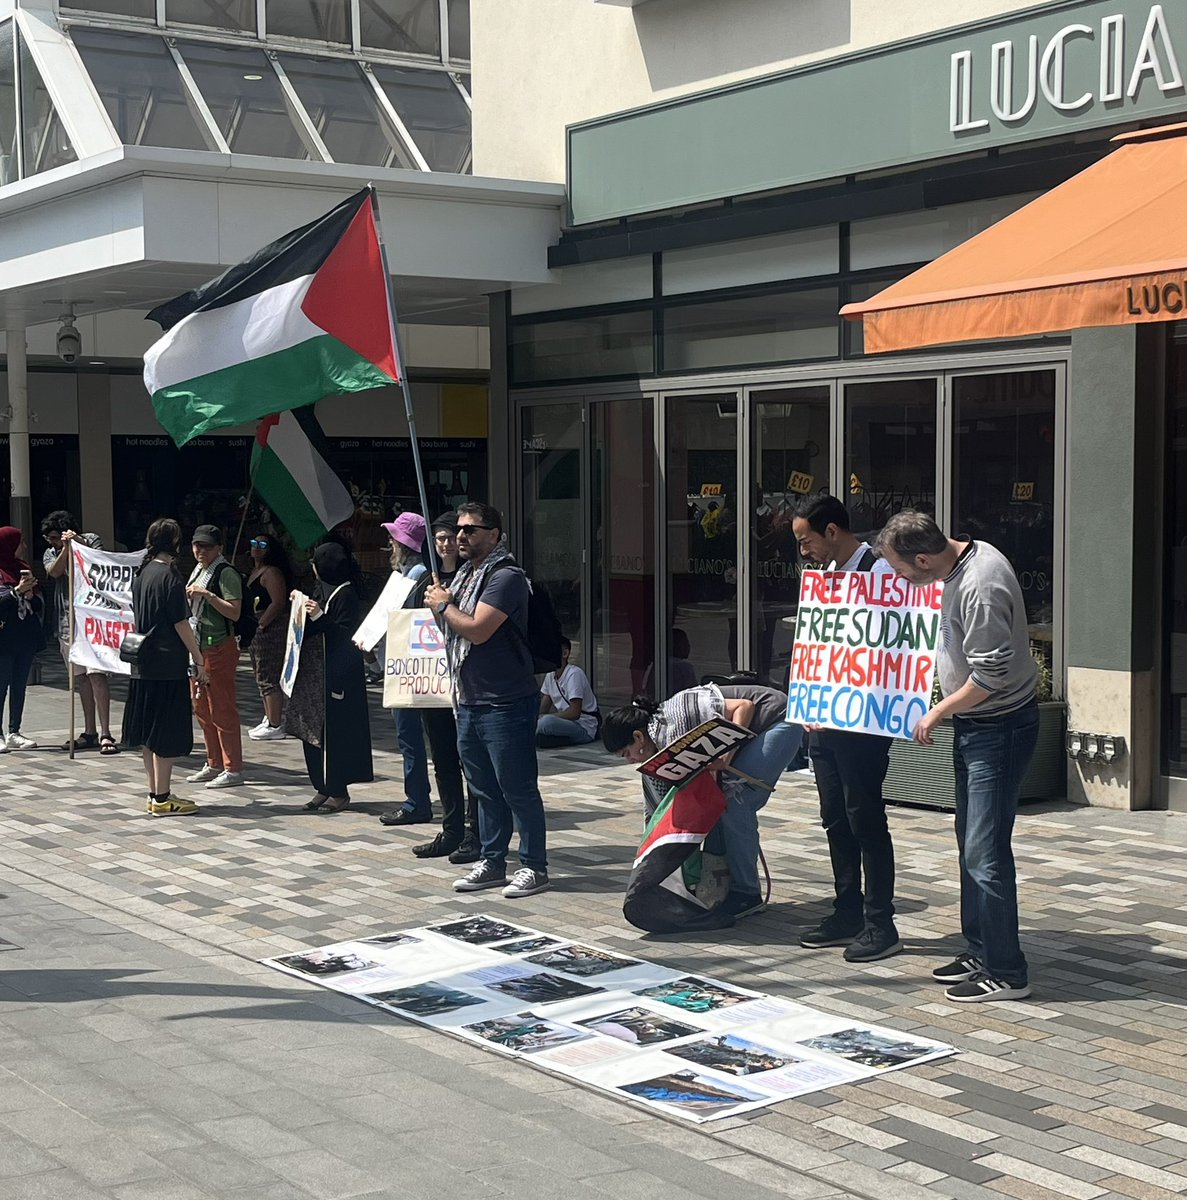 It appears that being a Jew hating Nazi wasn’t that fashionable in Woking, Surrey today.

So unpopular that organisers @WestSurreyPSC jumped on the “free Sudan, Congo and Kashmir” bandwagon as well, all of which are being destroyed by MUSLIMS.